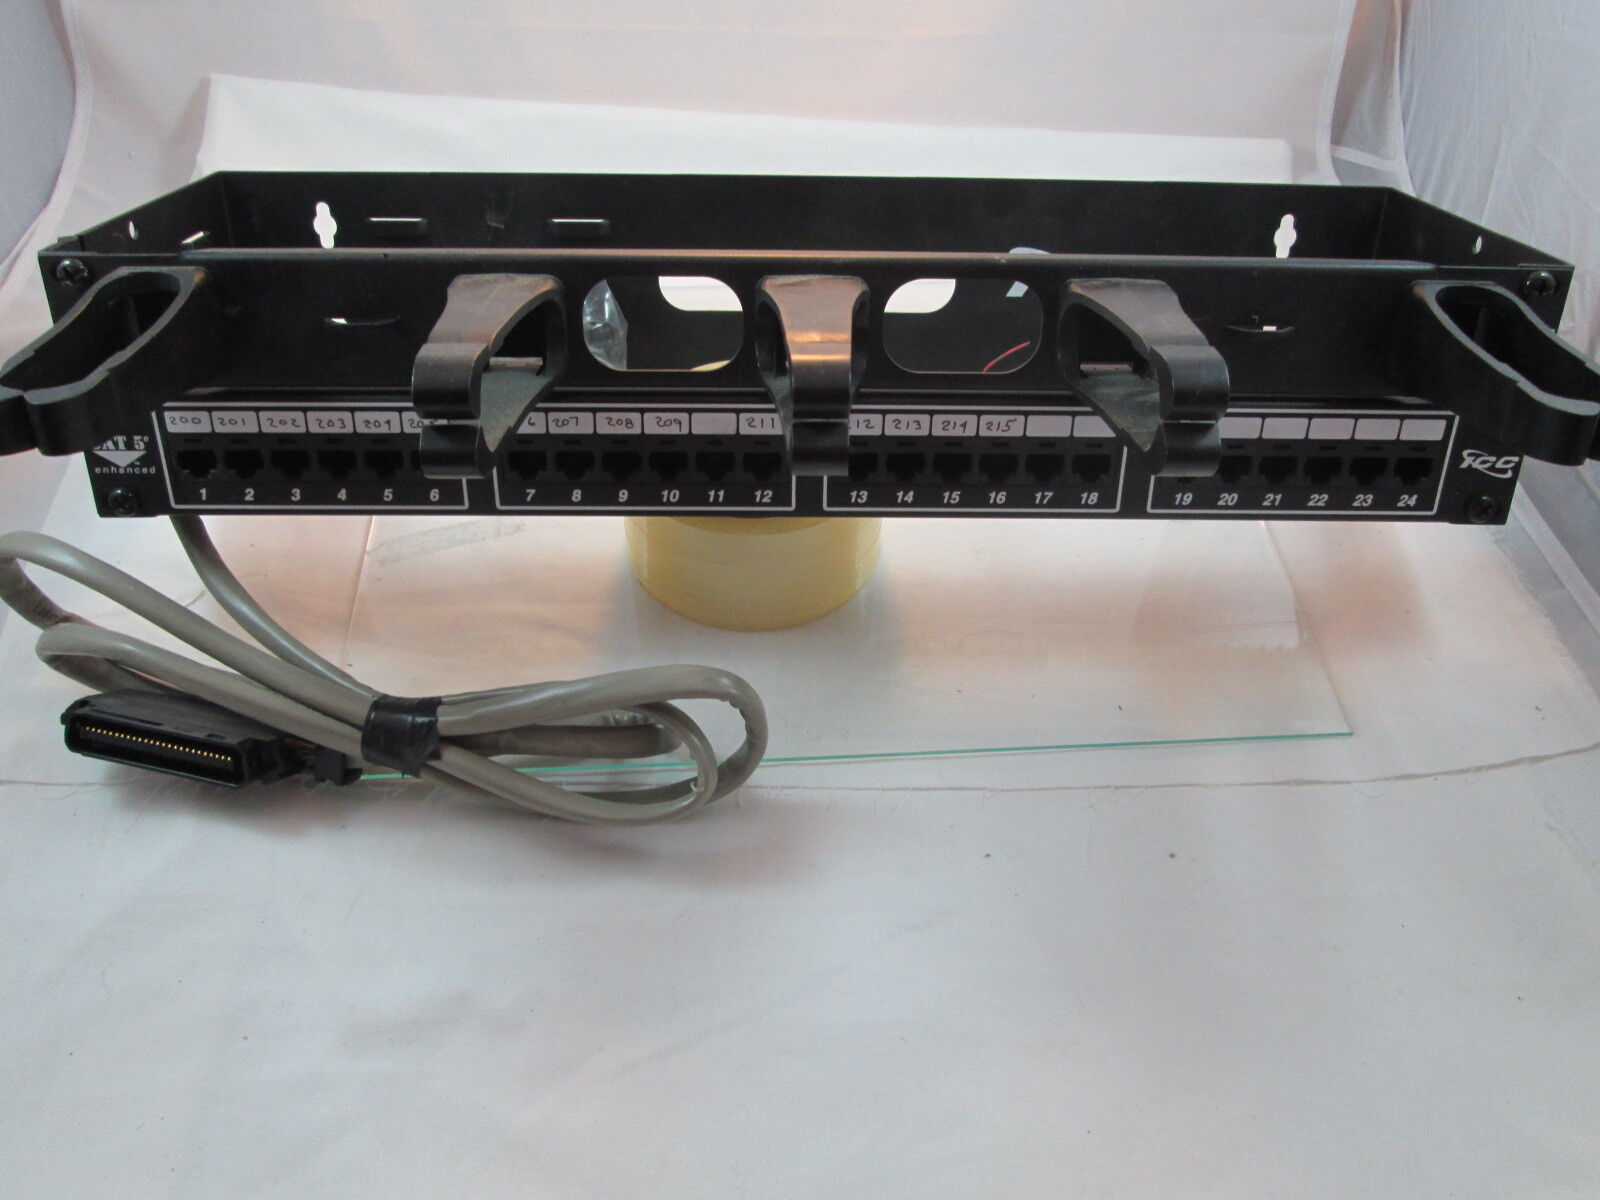 ICCMSHB2RS  - patch panel,mounting rack,cat 5 organizer- get all three